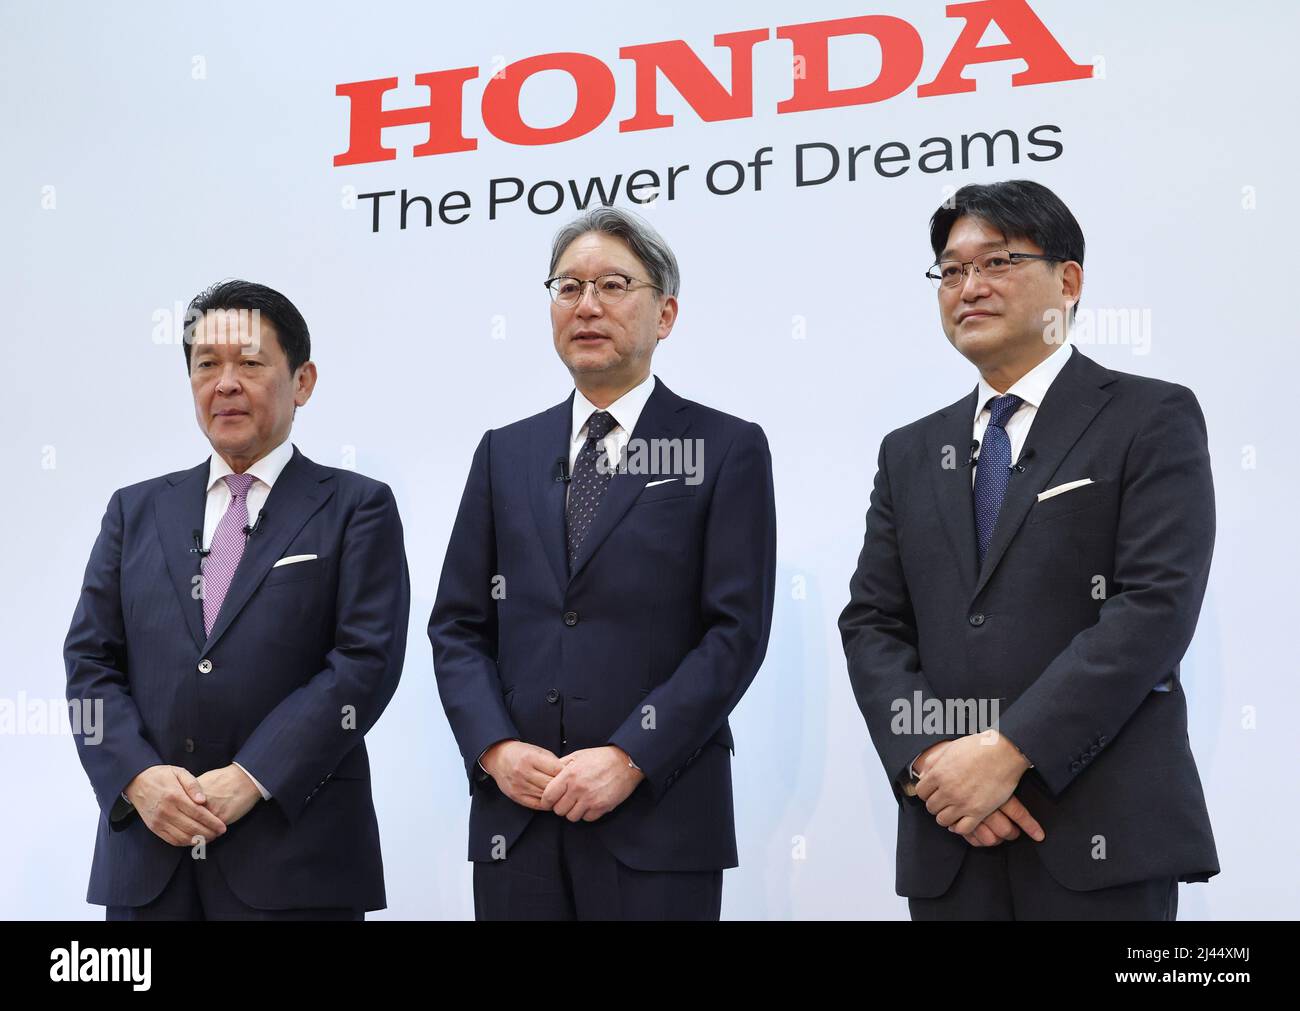 Tokyo, Japan. 12th Apr, 2022. Japan's automobile giant Honda Motor (L-R) senior managing executive officer Shinji Aoyama, president Toshihiro Mibe and executive vice president Kohei Takeuchi pose for photo at a press conference for the company's business strategy of electric vehicles at Honda's headquarters in Tokyo on Tuesday, April 12, 2022. Honda announced the company had plan to launch 30 EV models globally by 2030 with production volume of more than 2 million units annually. Credit: Yoshio Tsunoda/AFLO/Alamy Live News Stock Photo